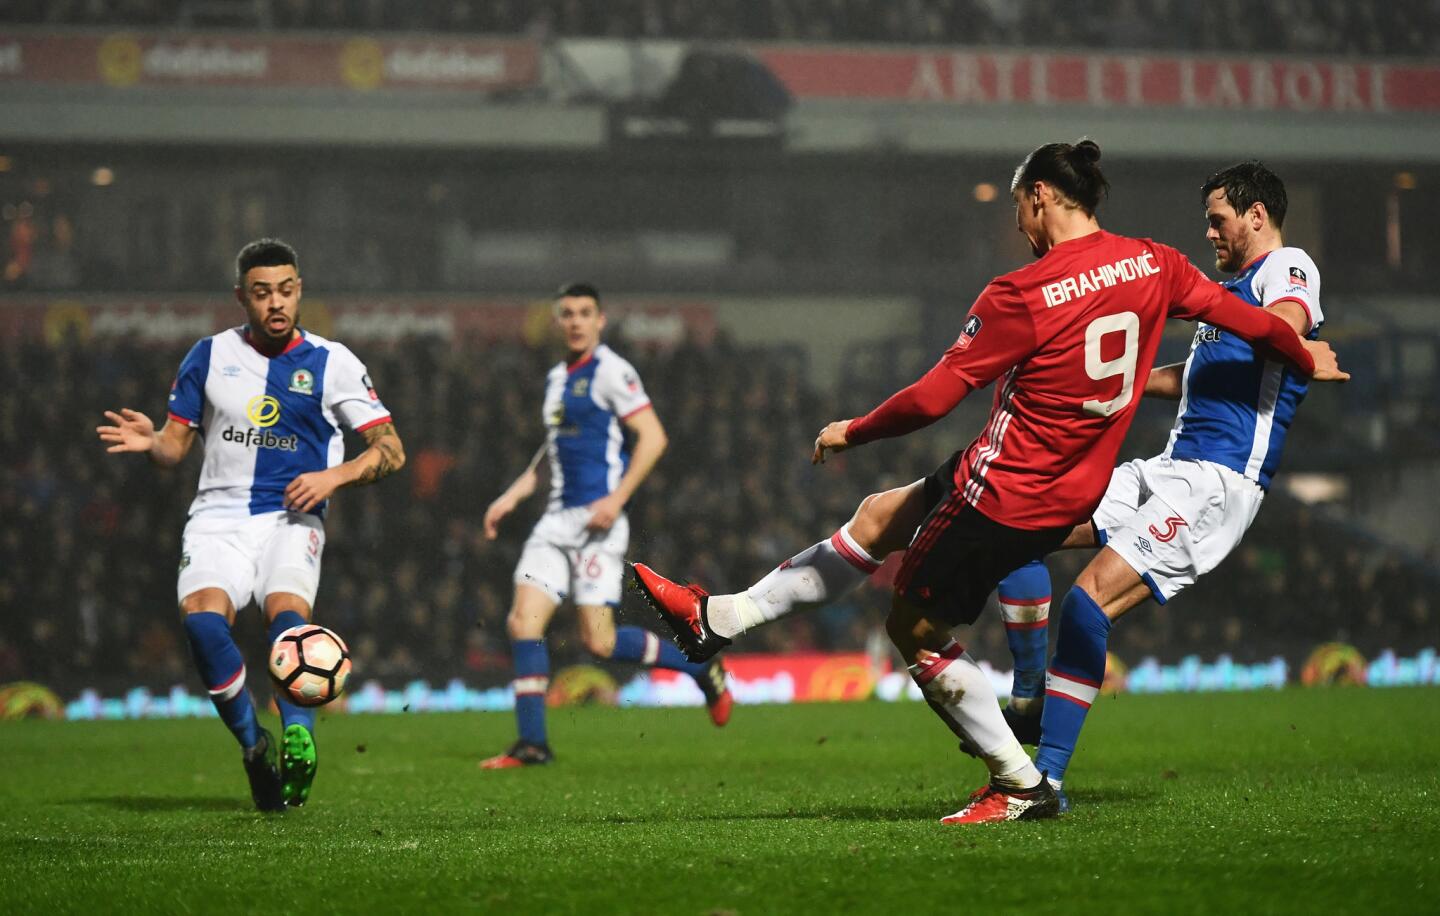 Blackburn Rovers v Manchester United - The Emirates FA Cup Fifth Round